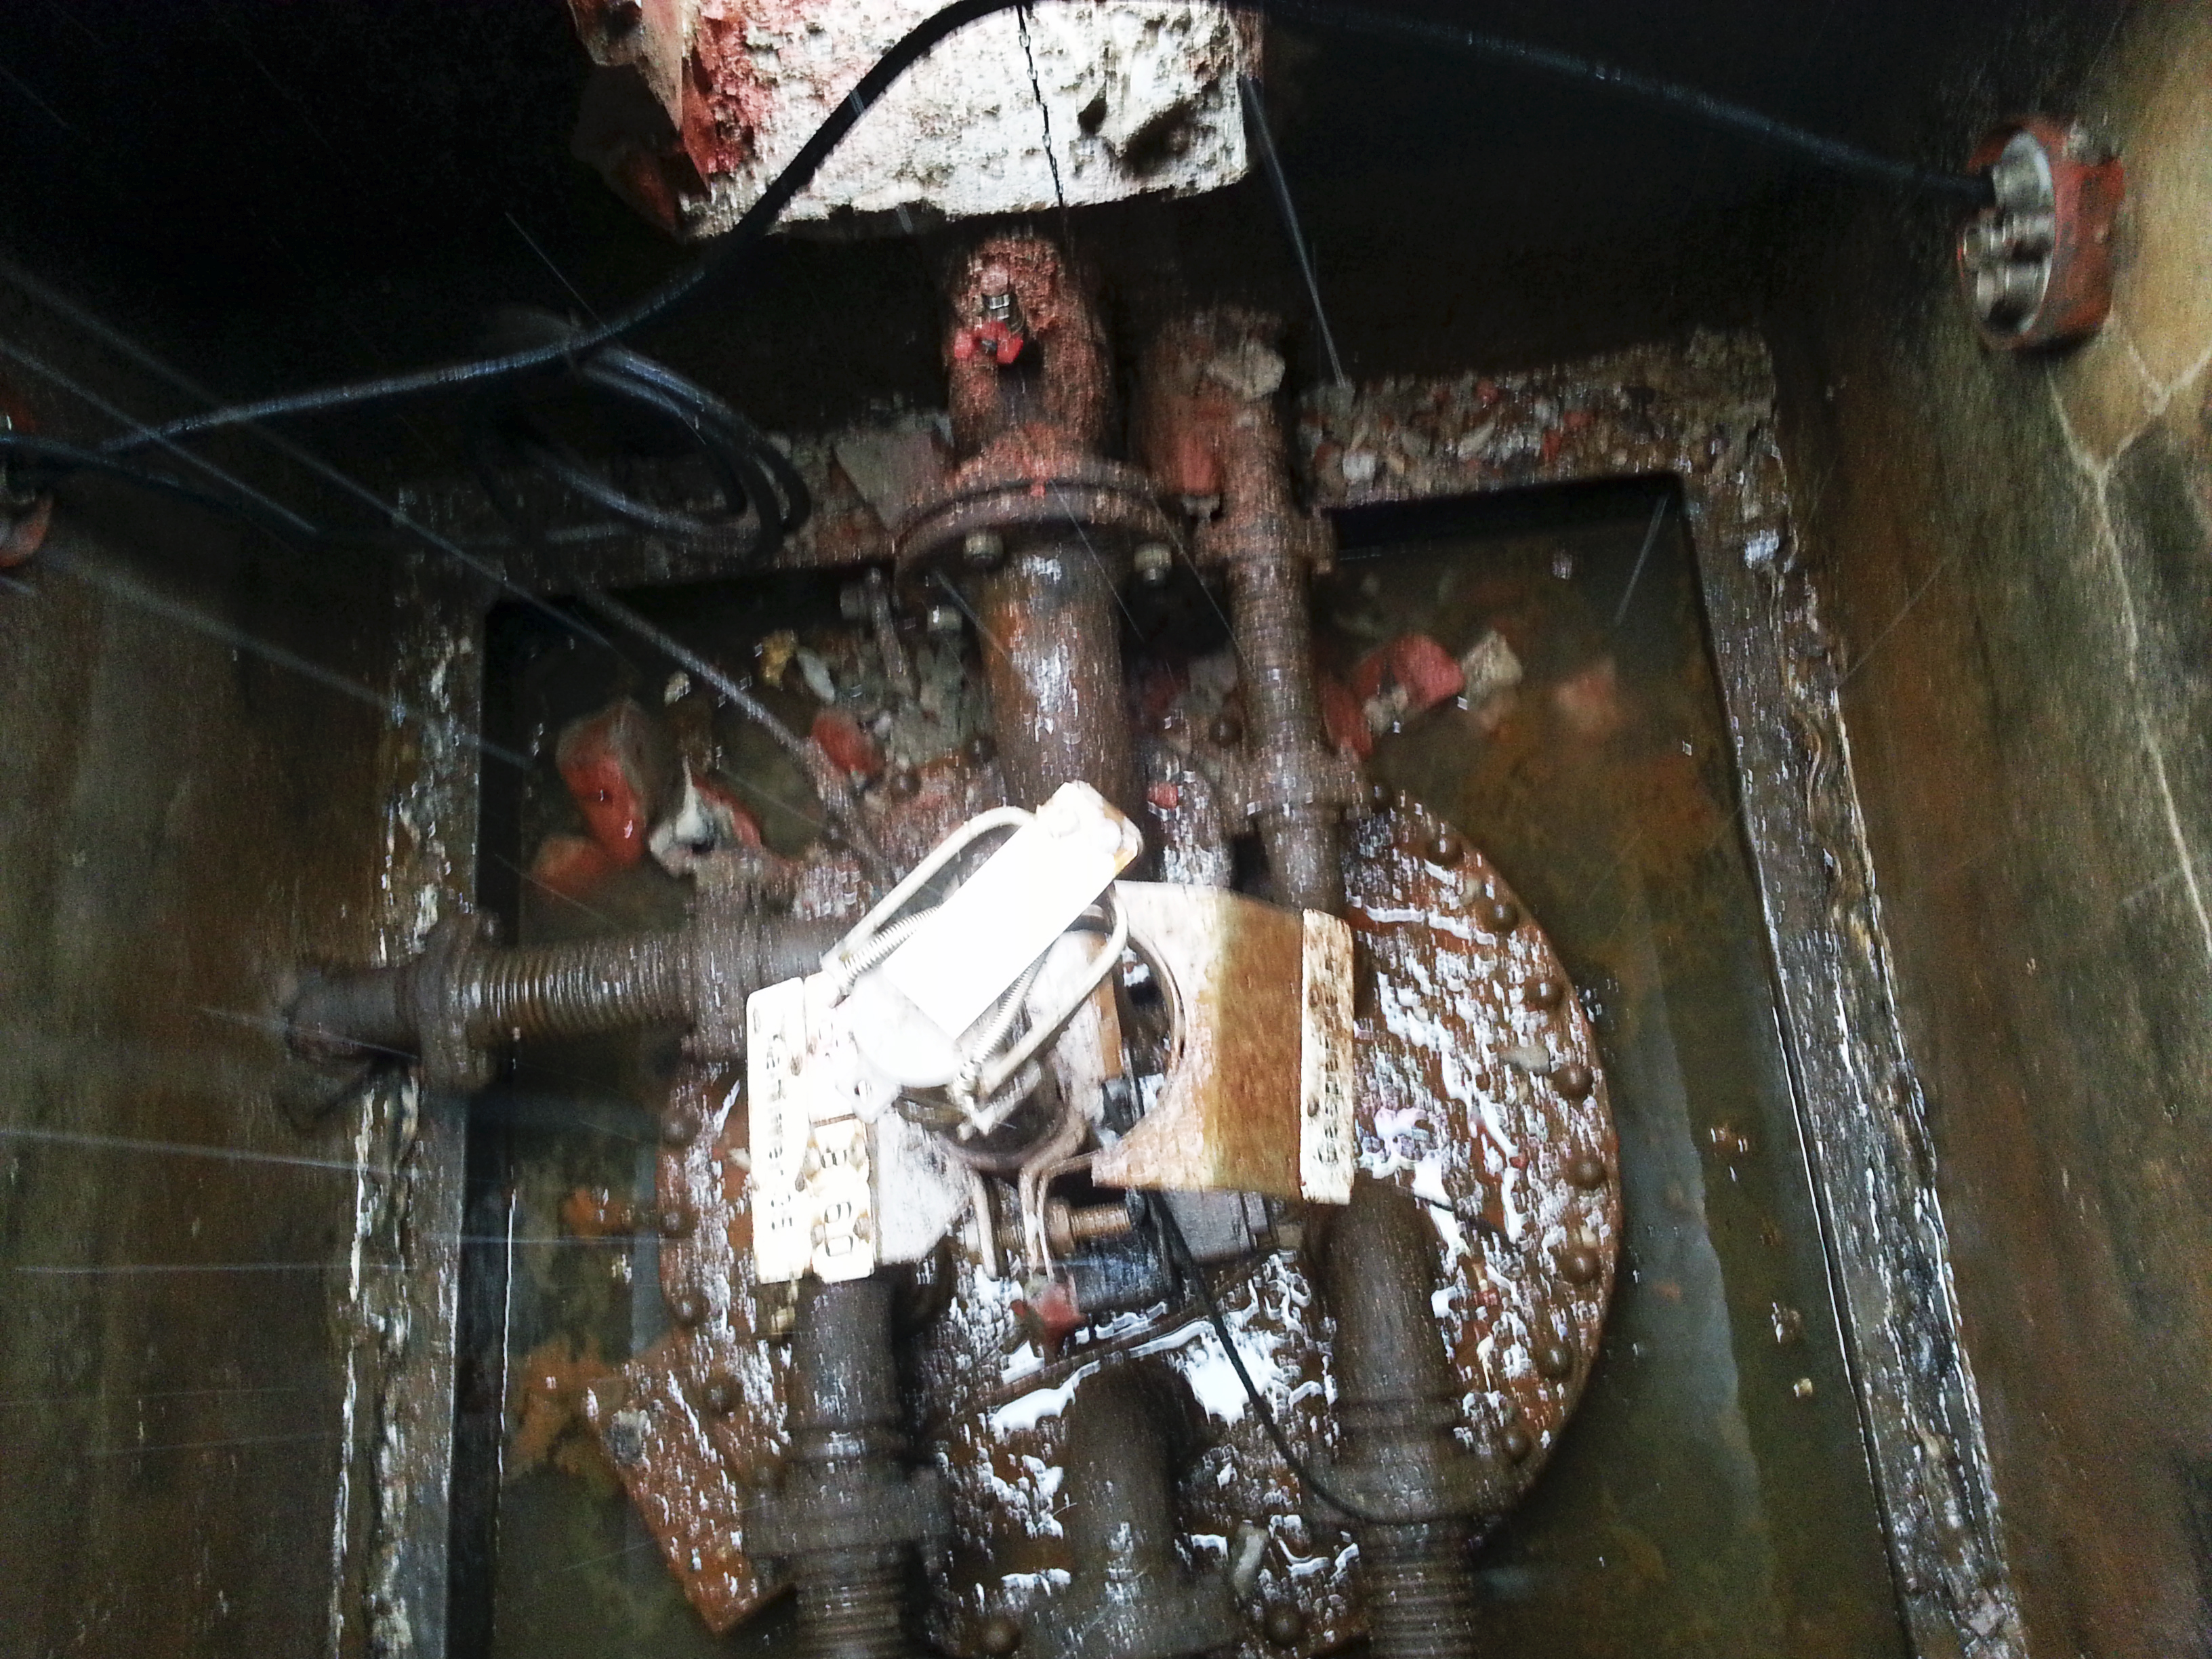 Previously installed steel piping had become damaged over time and started to rust